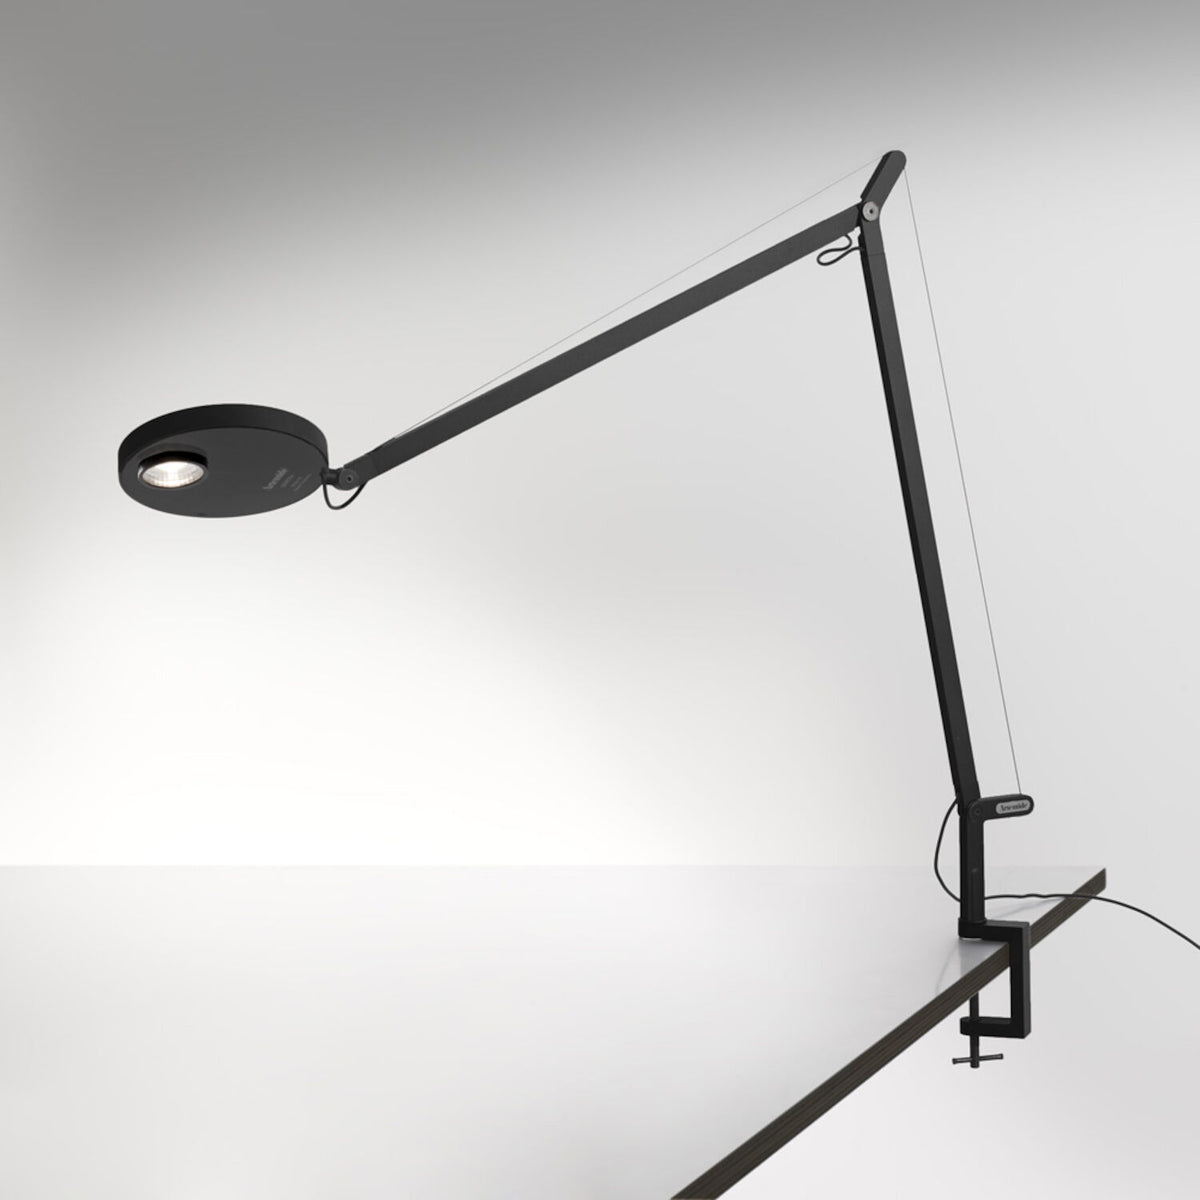 DEMETRA PRO 3000K LED TABLE LAMP WITH CLAMP, DEMPTC30K